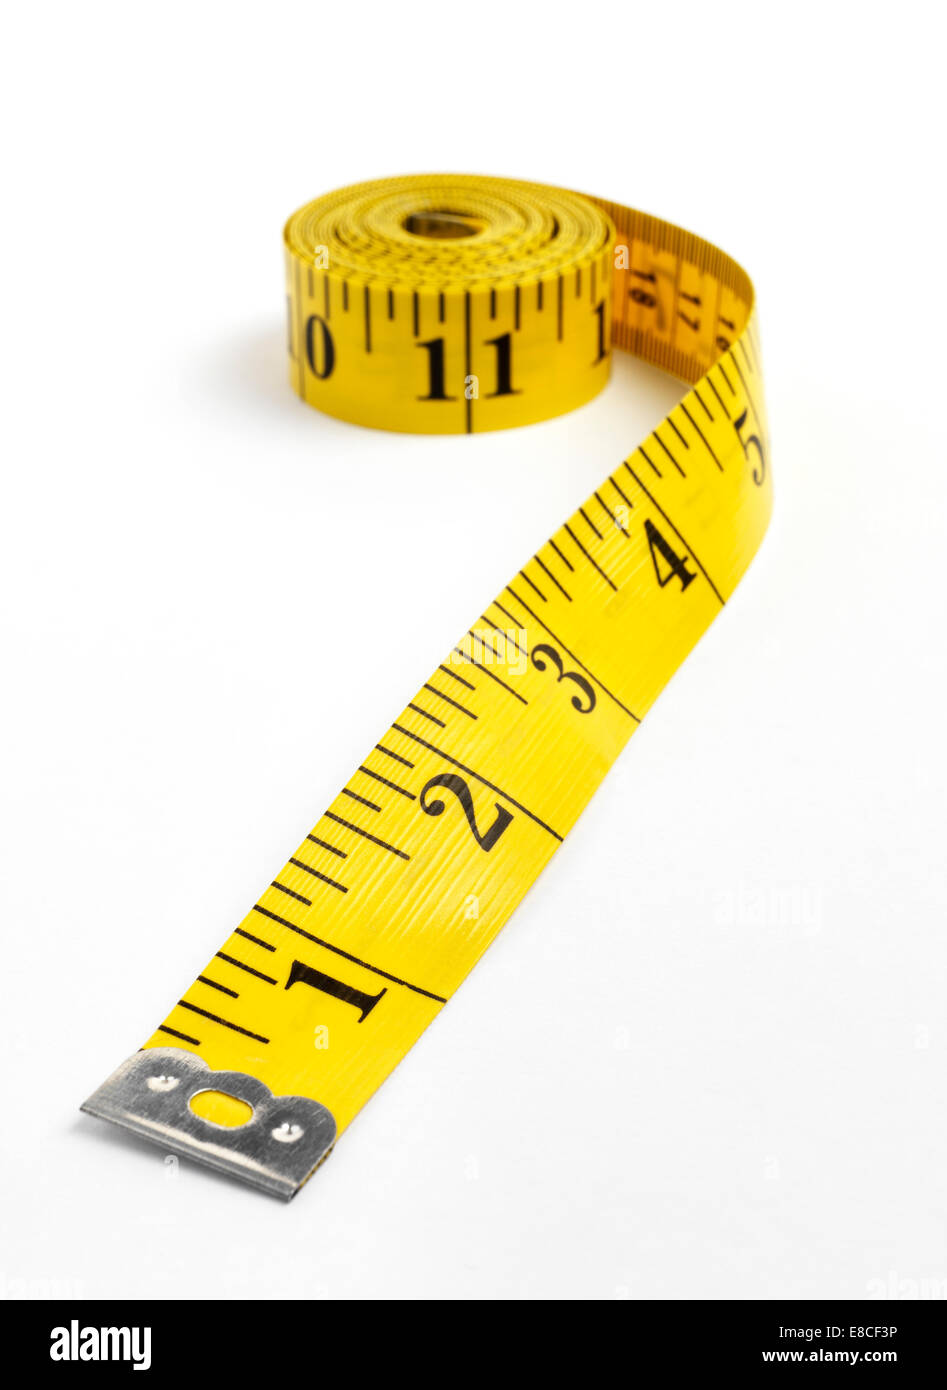 Tailors tape measure cut out against a white background. Blue measuring  tape Stock Photo - Alamy